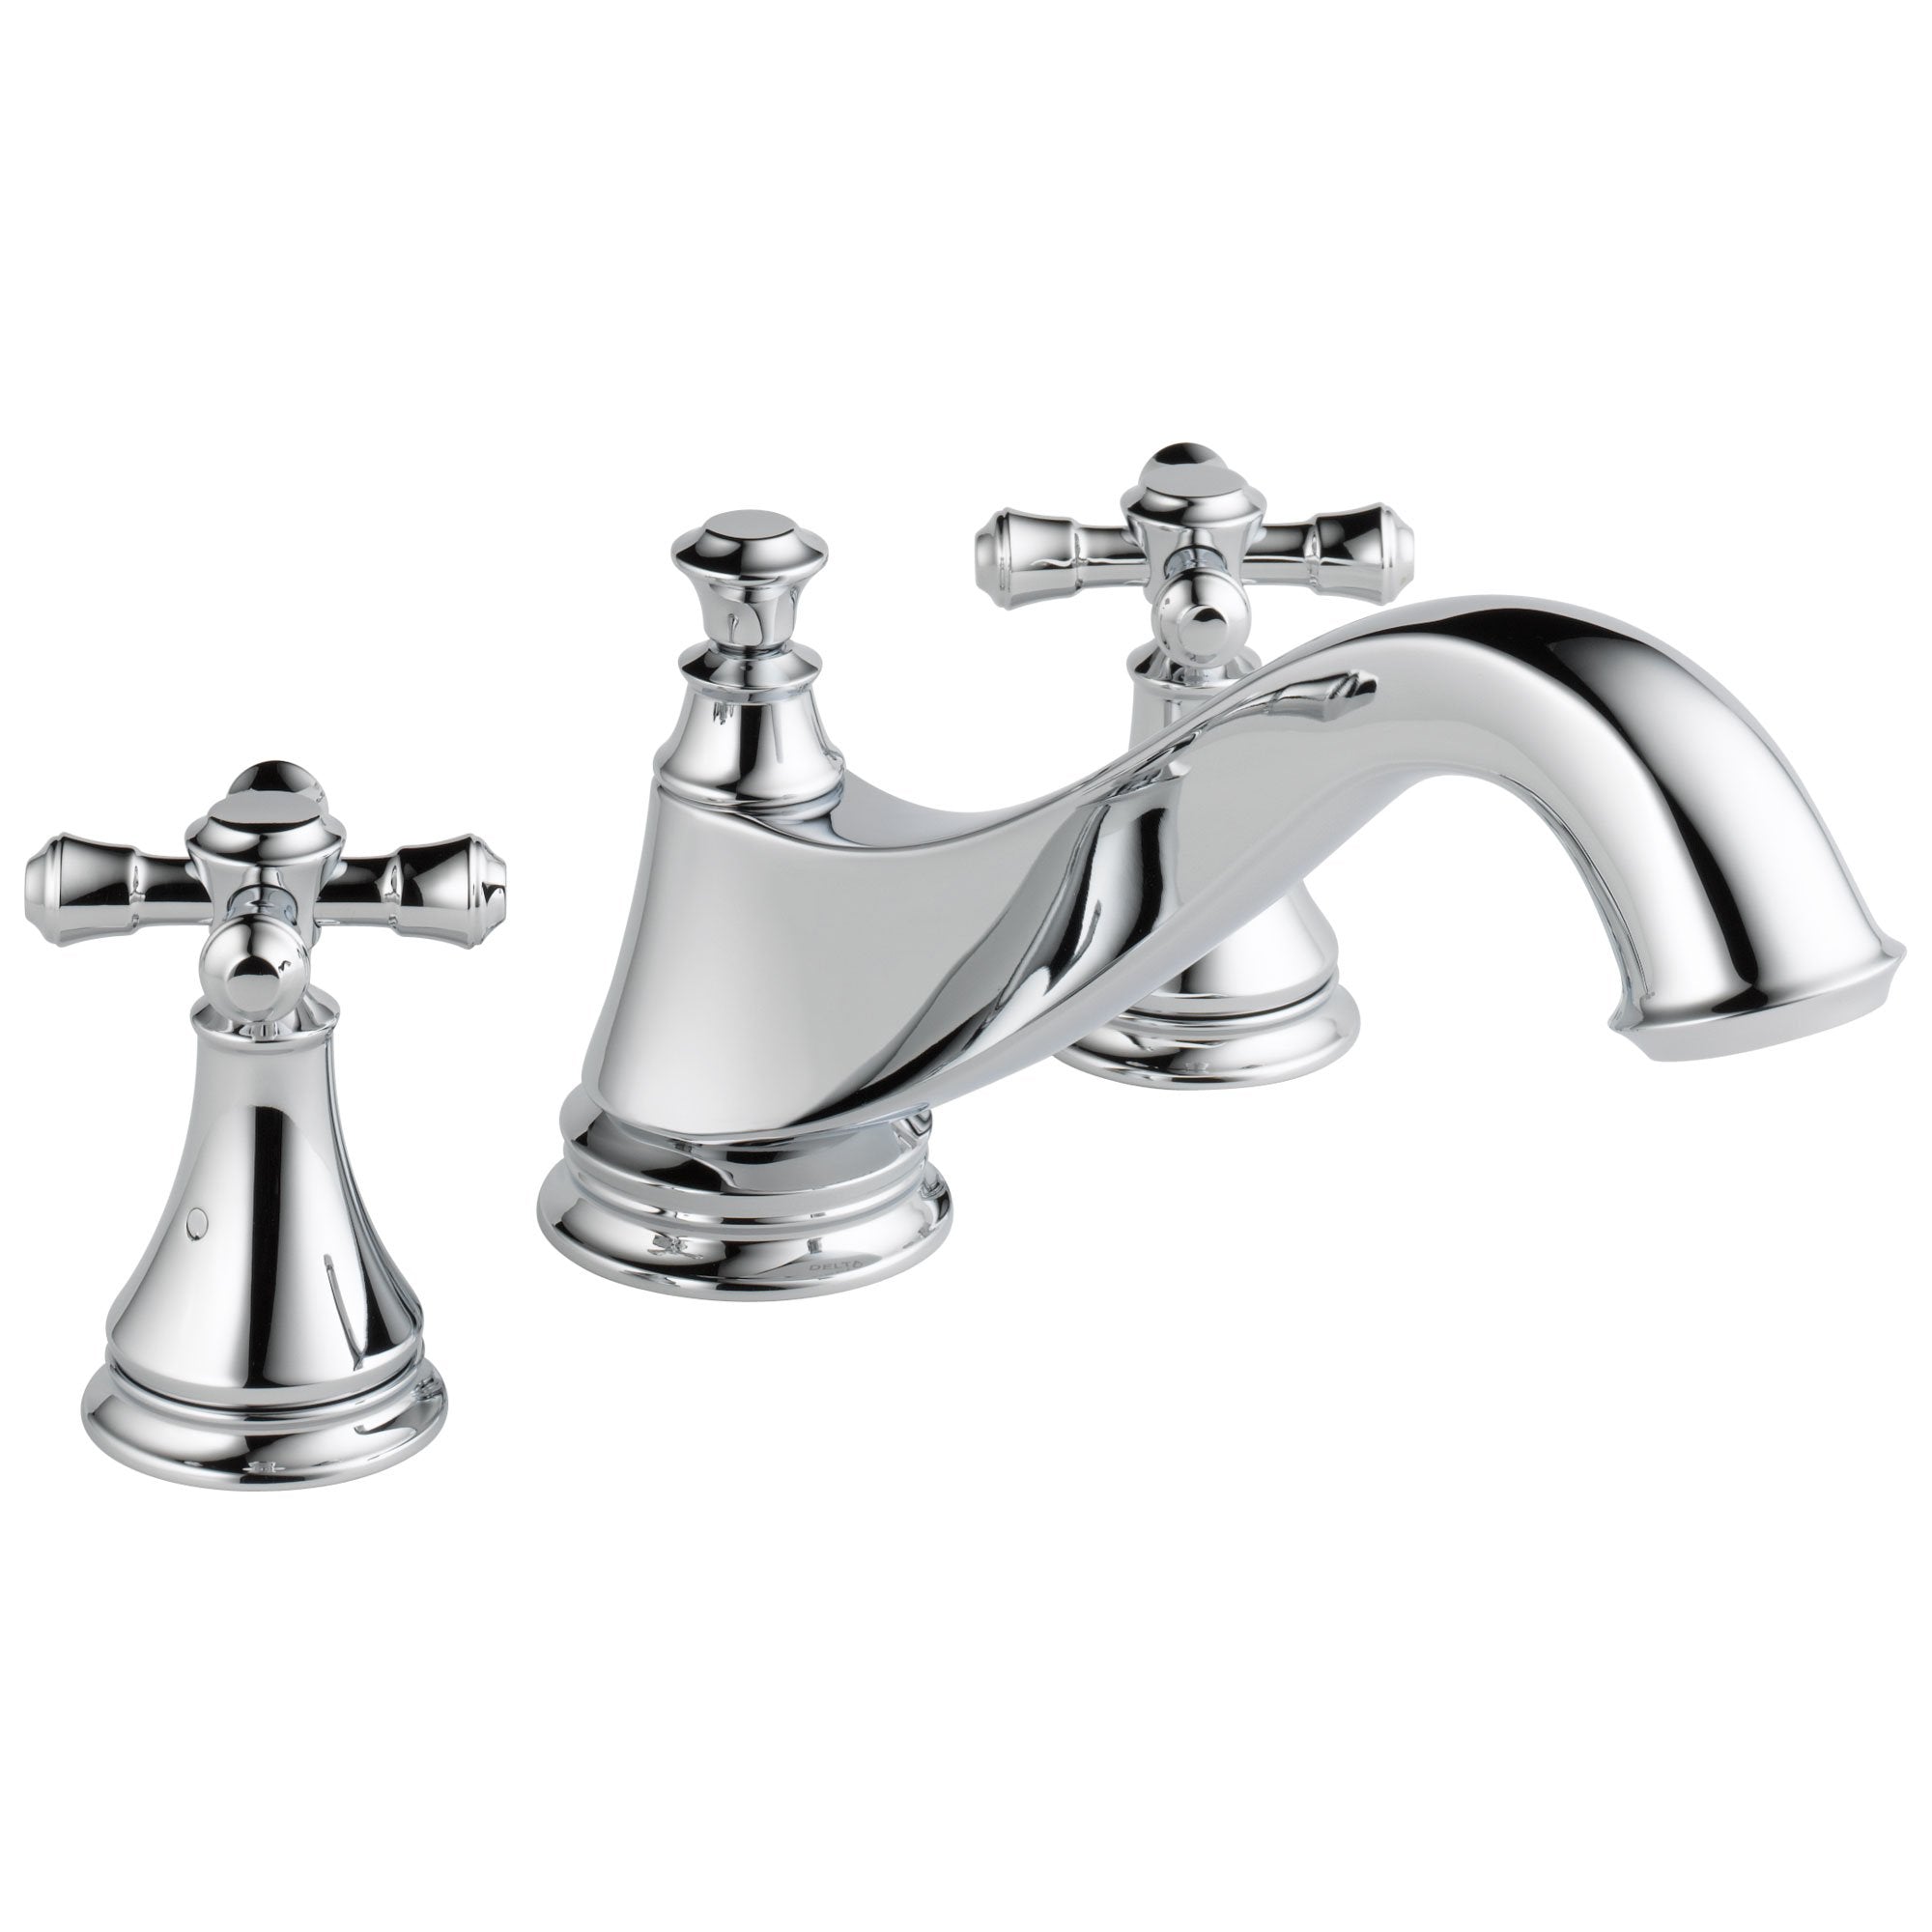 Delta Cassidy Collection Chrome Finish Traditional Spout Roman Tub Filler Faucet COMPLETE ITEM Includes (2) Cross Handles and Rough-in Valve D1451V